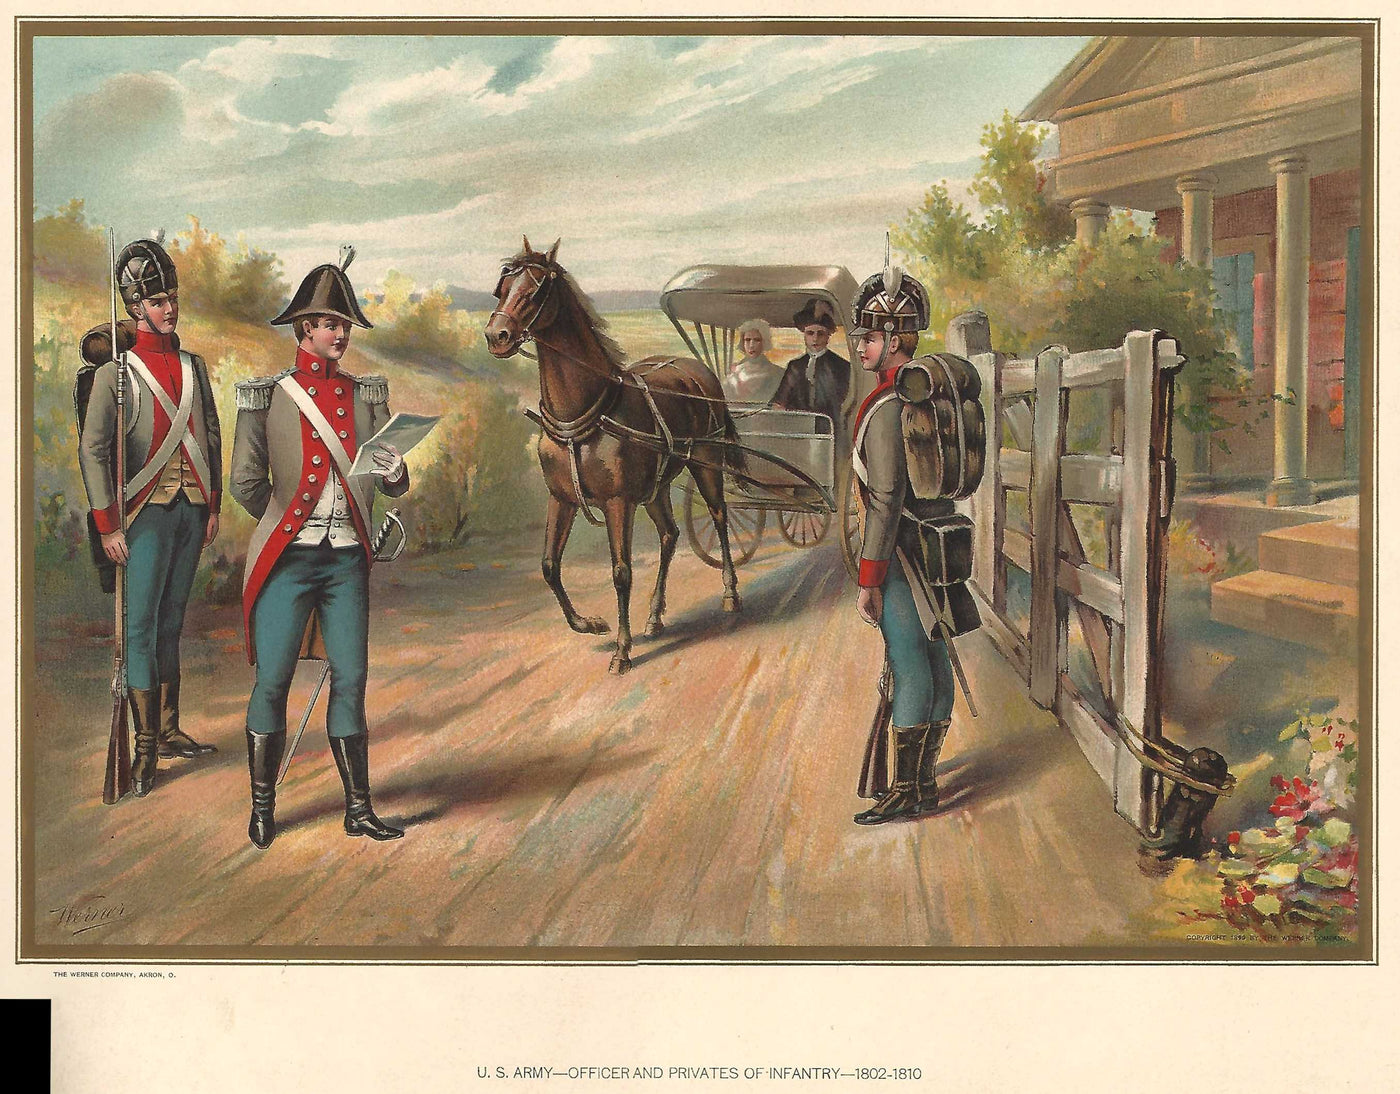 United States Army infantry officer and privates 1802-1810 antique print